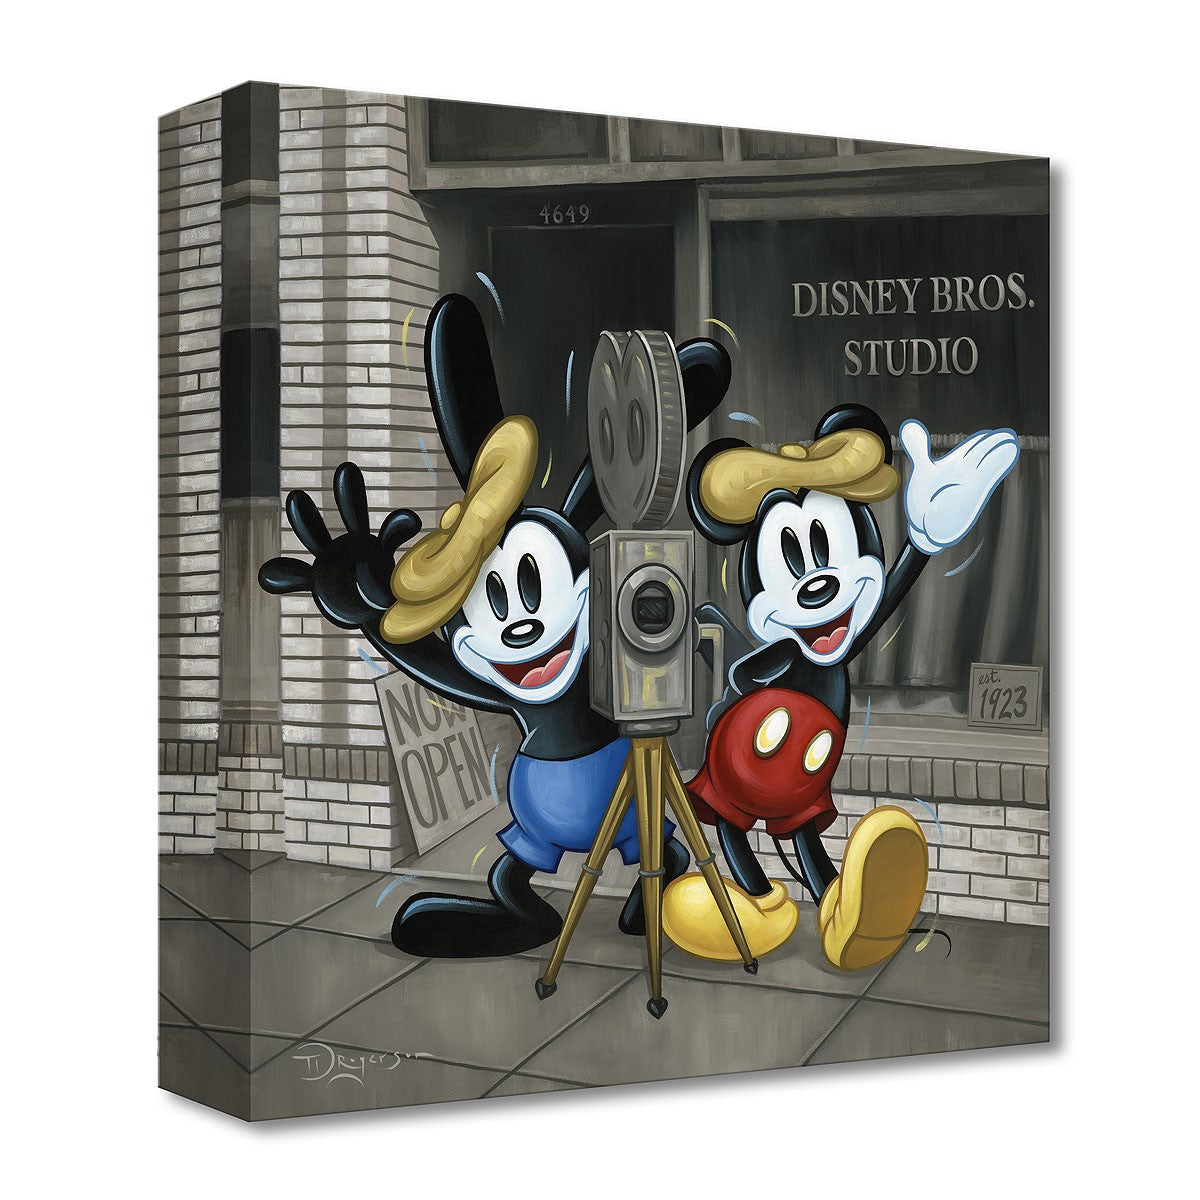 Bros In Business by Tim Rogerson.  The two Mickeys posing in front of Disney Bros. Studio, with their movie camera.